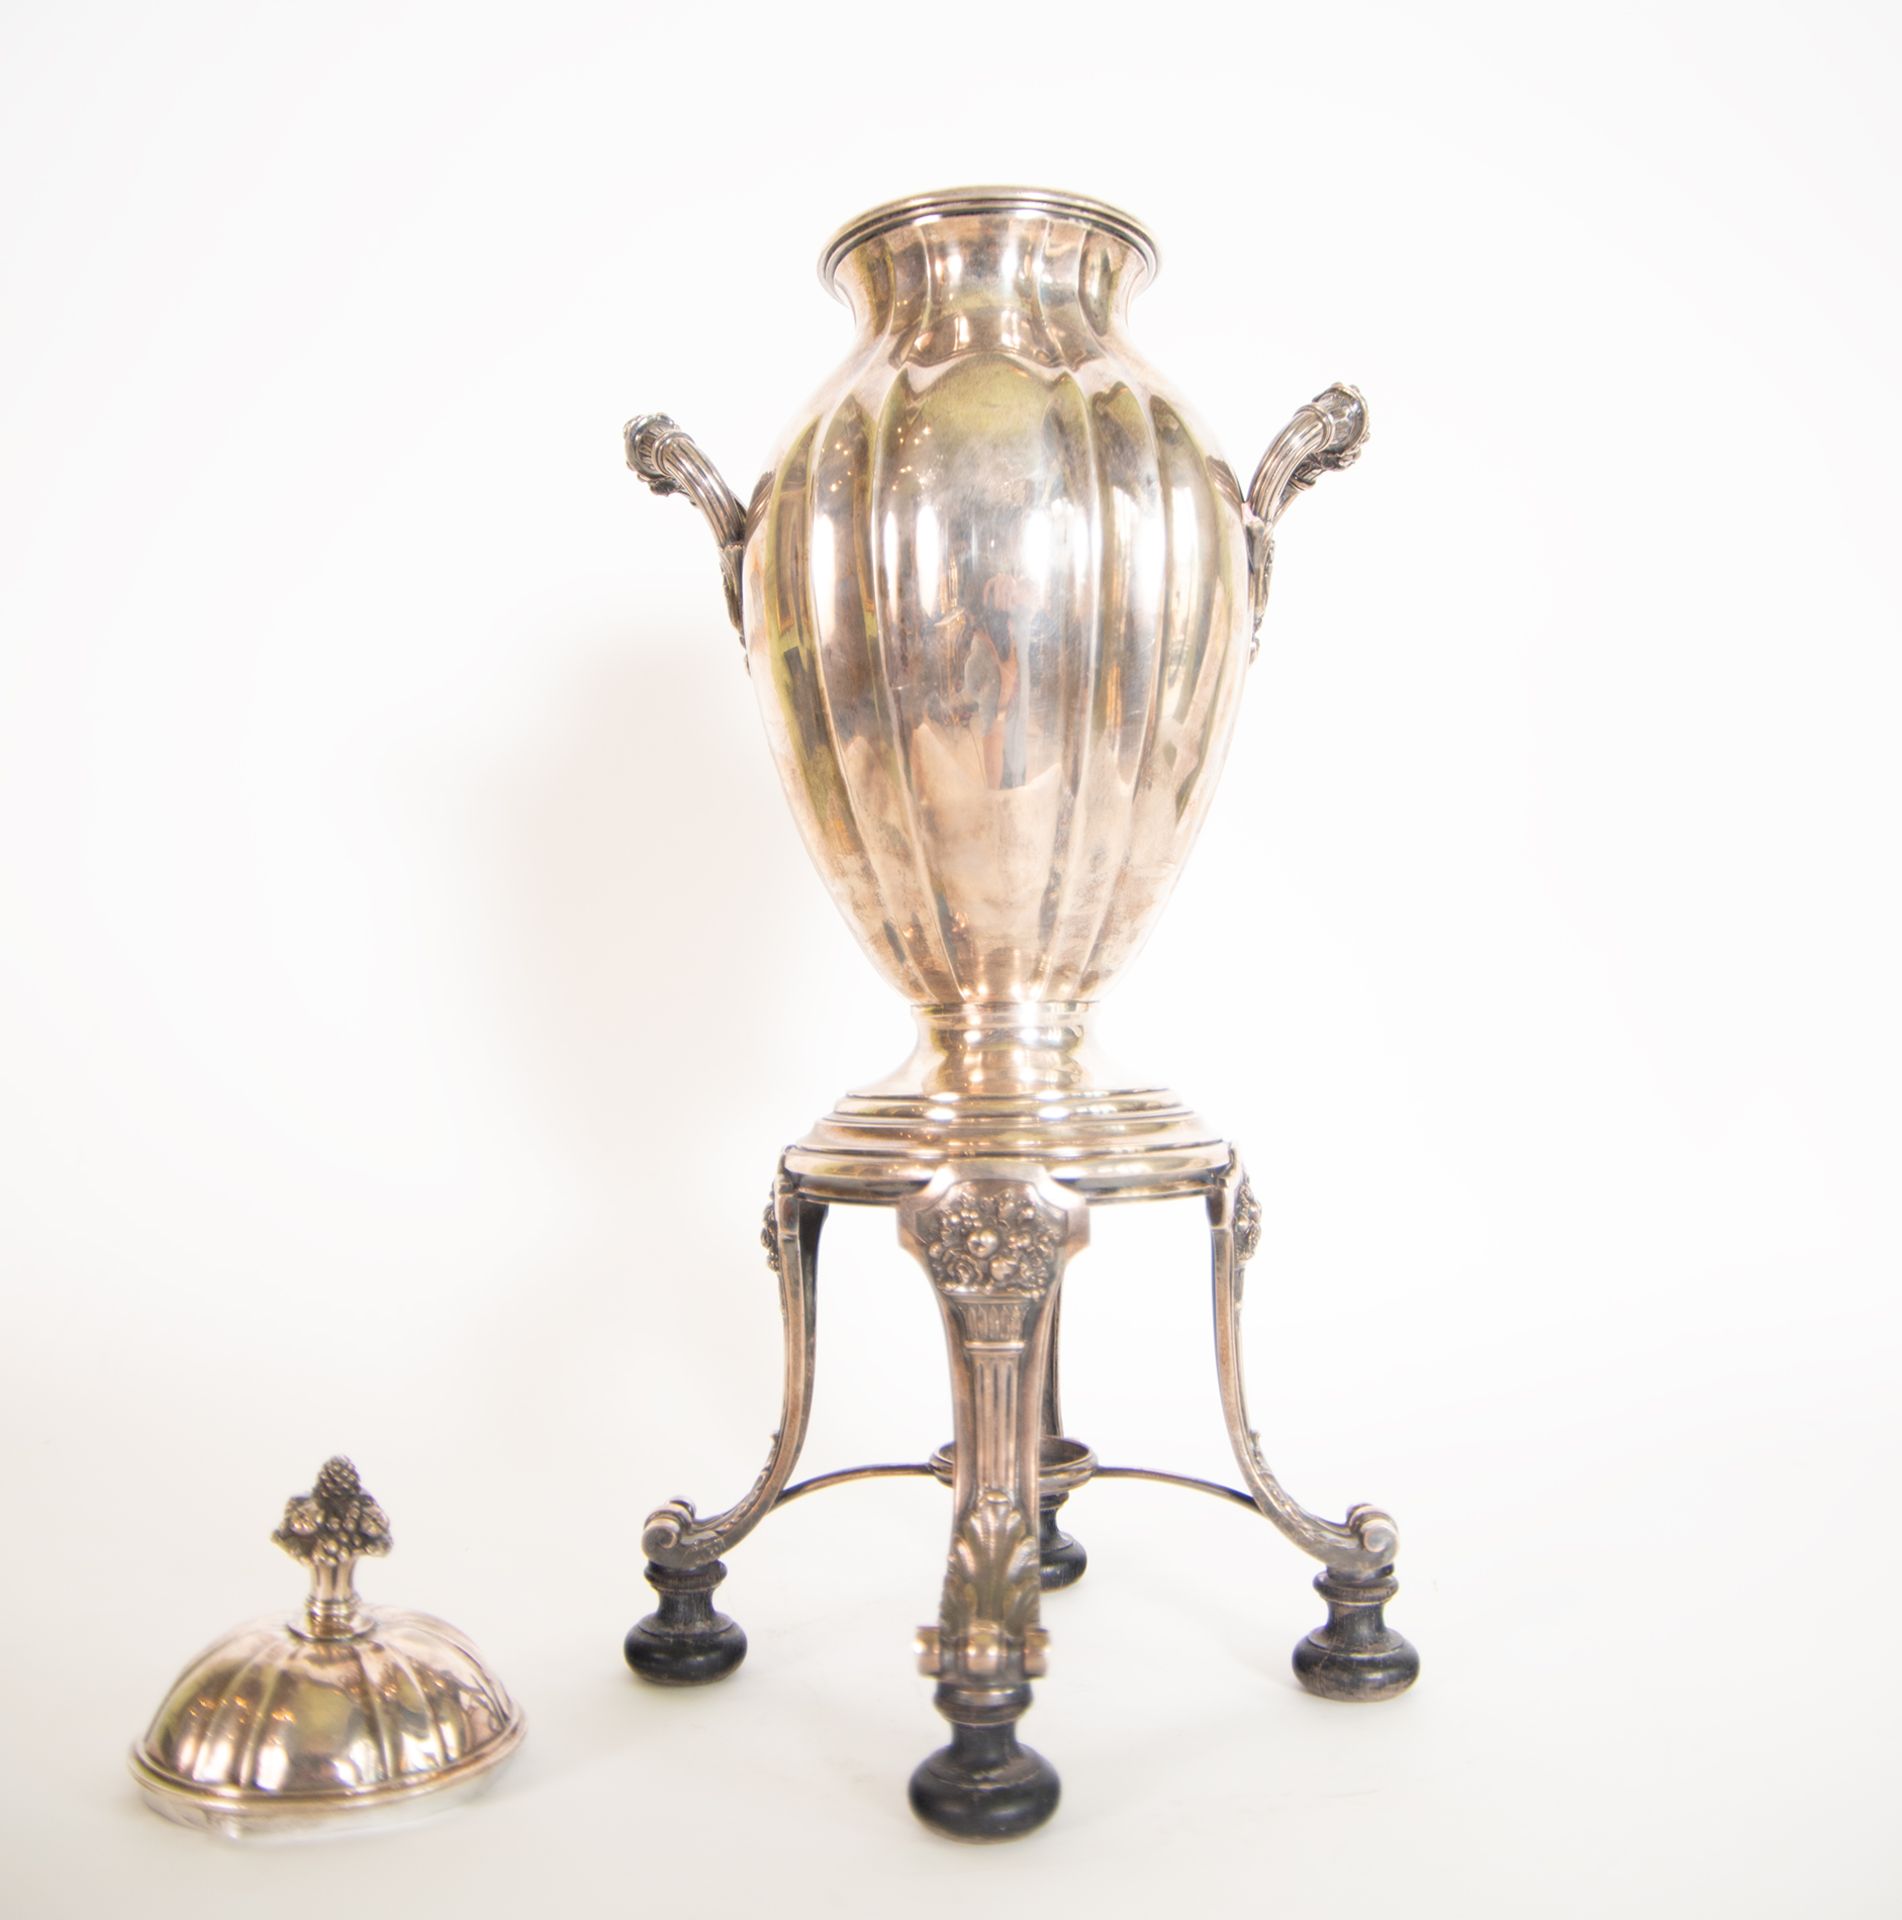 19th century French Silver Samovar, 19th century French school - Image 4 of 5